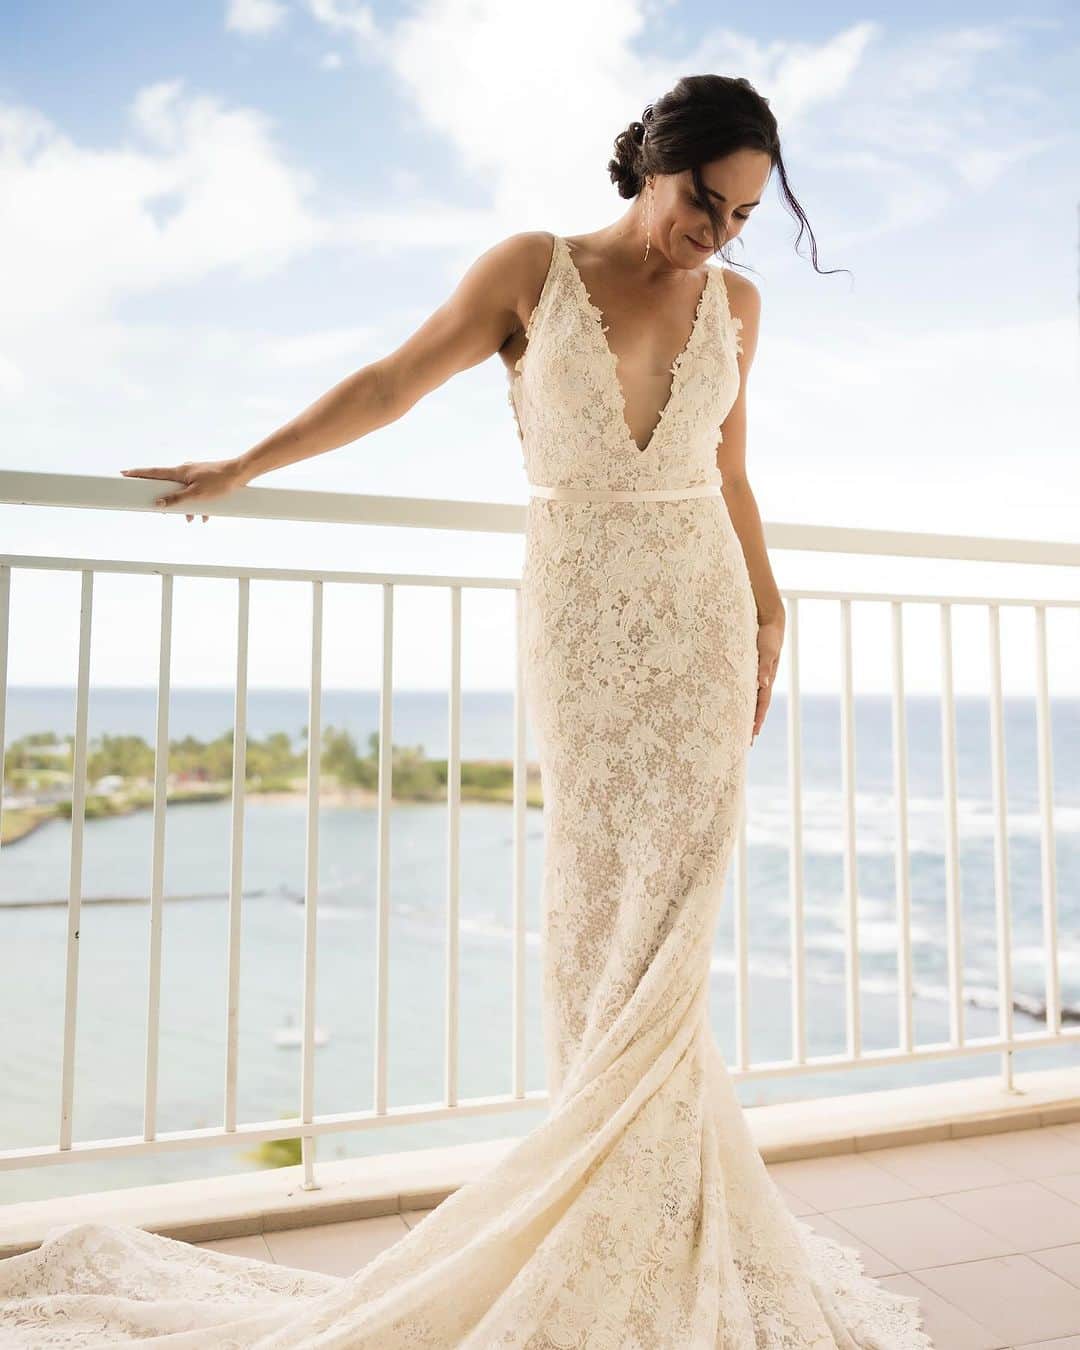 Pronoviasのインスタグラム：「“Puerto Rico is a place full of history, love, and energy! It’s La Isla del Encanto, so I wanted a dress that could capture all of that and one that I could be fully myself in (danced salsa in it all night!). The Pronovias Estela gown was my everything and beyond. My fiancé and I lived in Barcelona for almost 3 years, so wearing a Pronovias gown was a way to feel connected to a journey that was so important to us. And I can’t imagine wearing anything else!”  Congratulations to the newlyweds @maggie.steffens & Bobby💛 Cheers to the beginning of a wonderful chapter in your lives!🥂  Dress: Estela Photographer: @weddingmafiaphotography  MUAH: @caridadvidro  Venue: @caribehilton  Planner: @amkevents   #PronoviasBride」